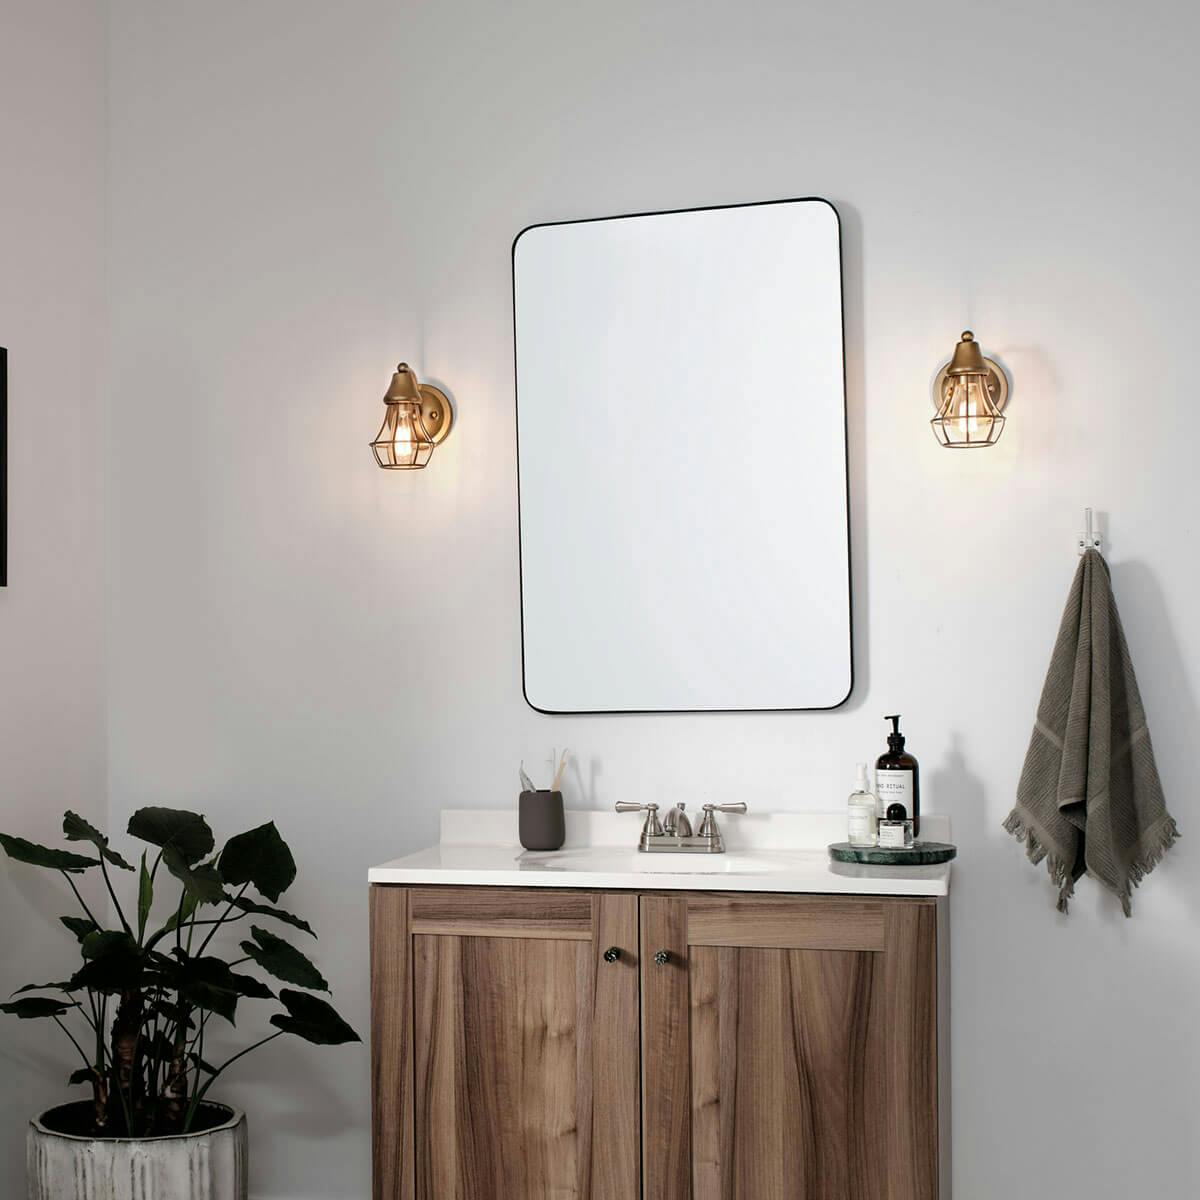 Day time Bathroom featuring Bayley vanity light 37511NBR